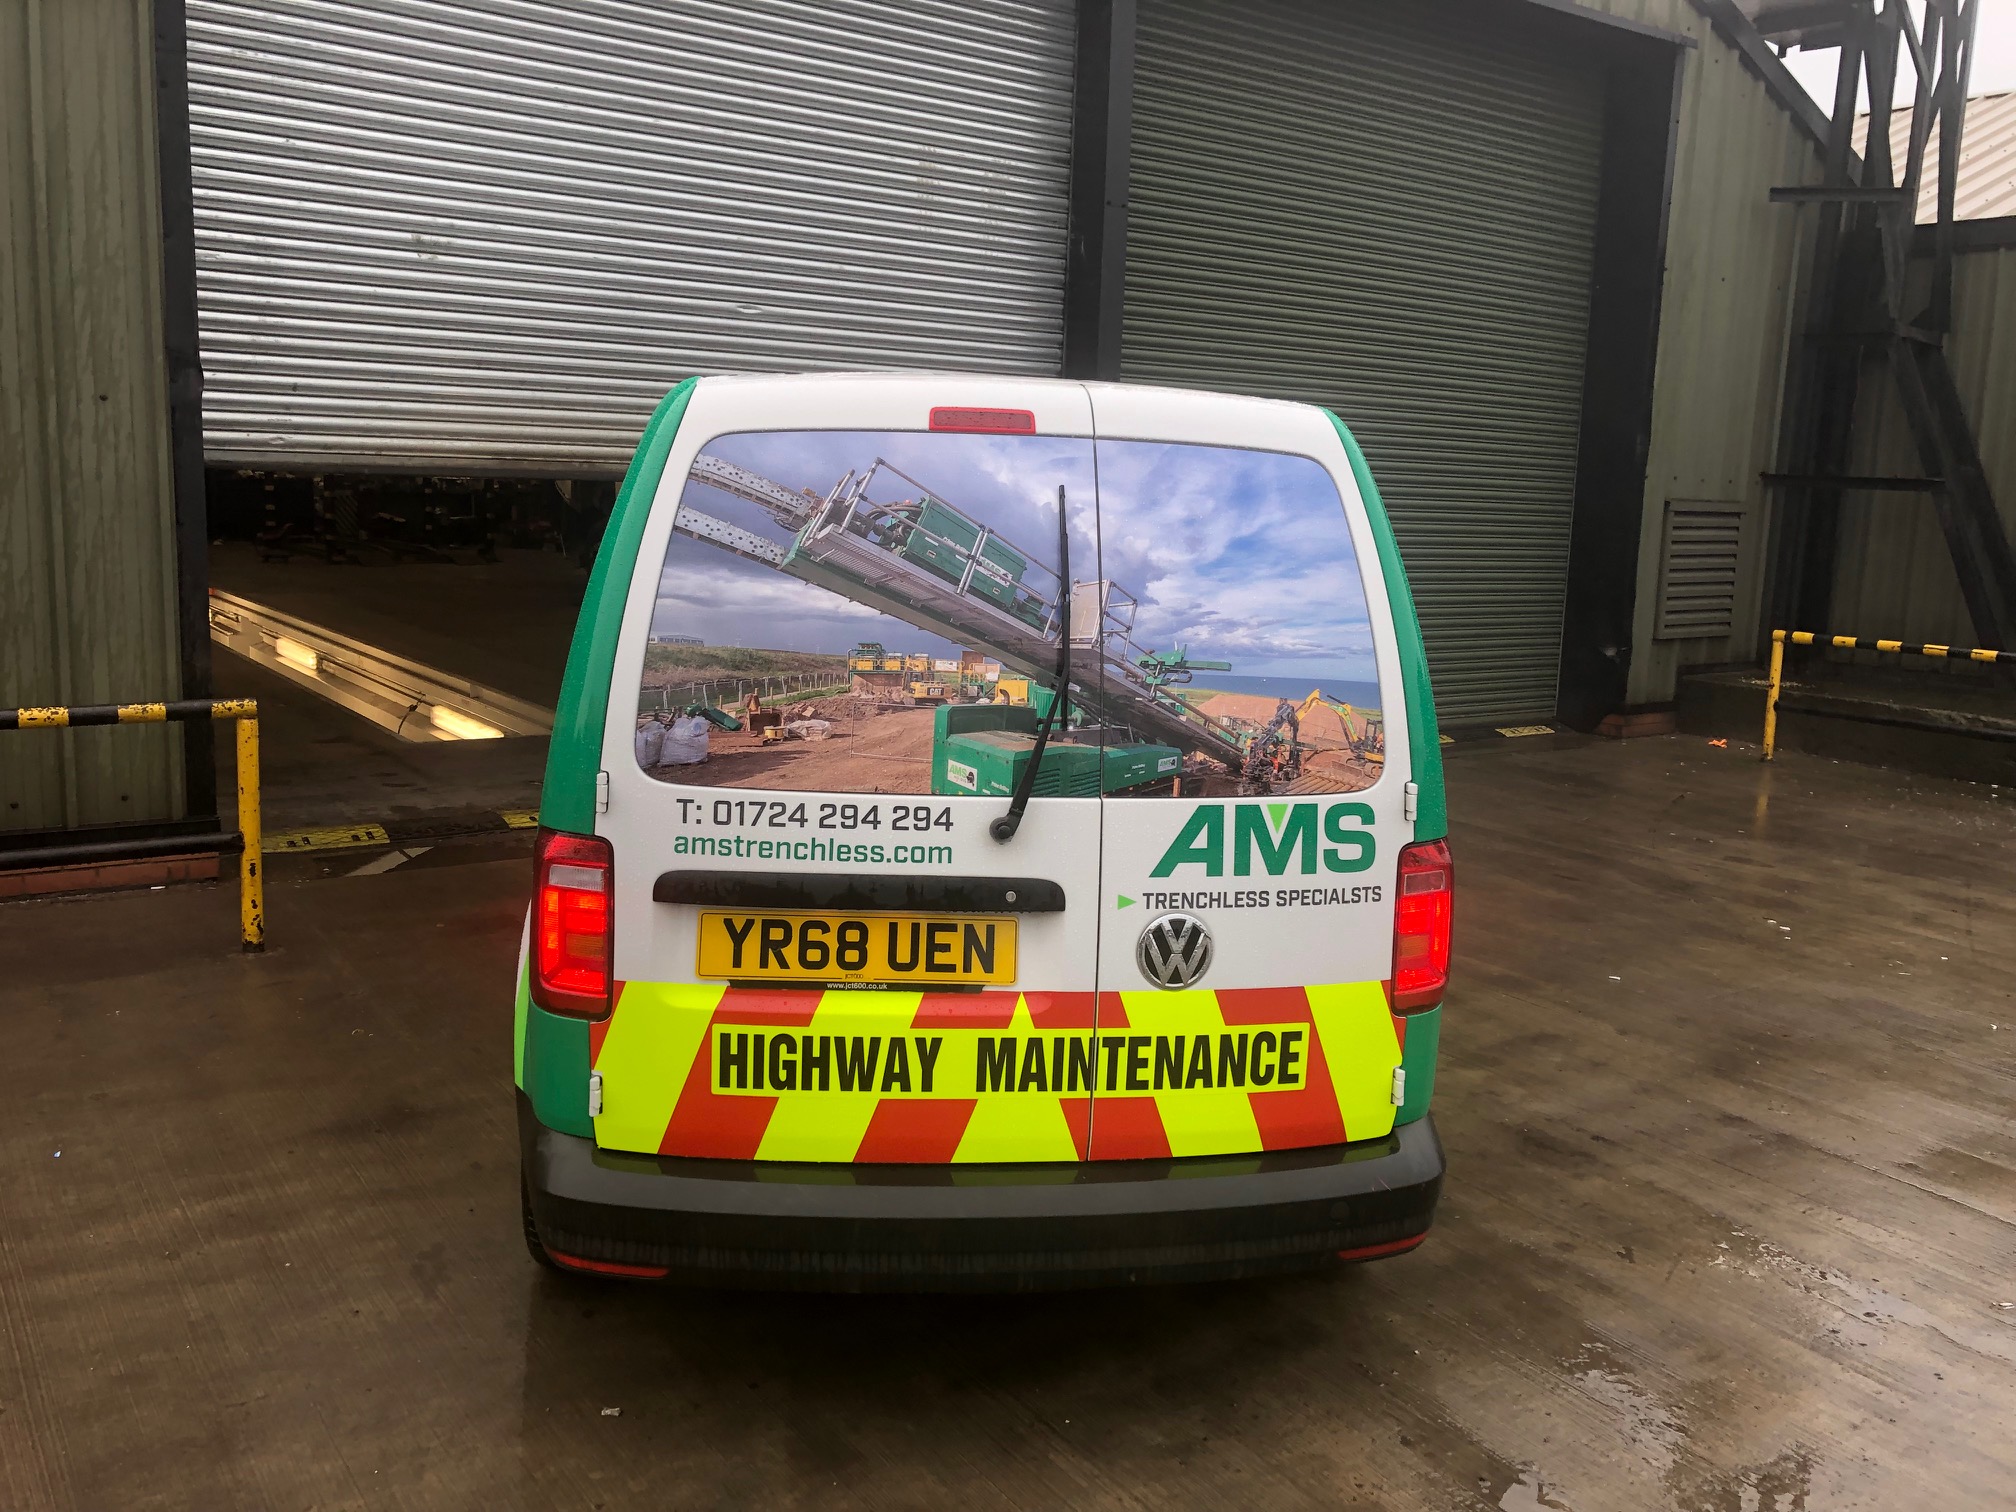 New fleet of vans added by AMS Trenchless